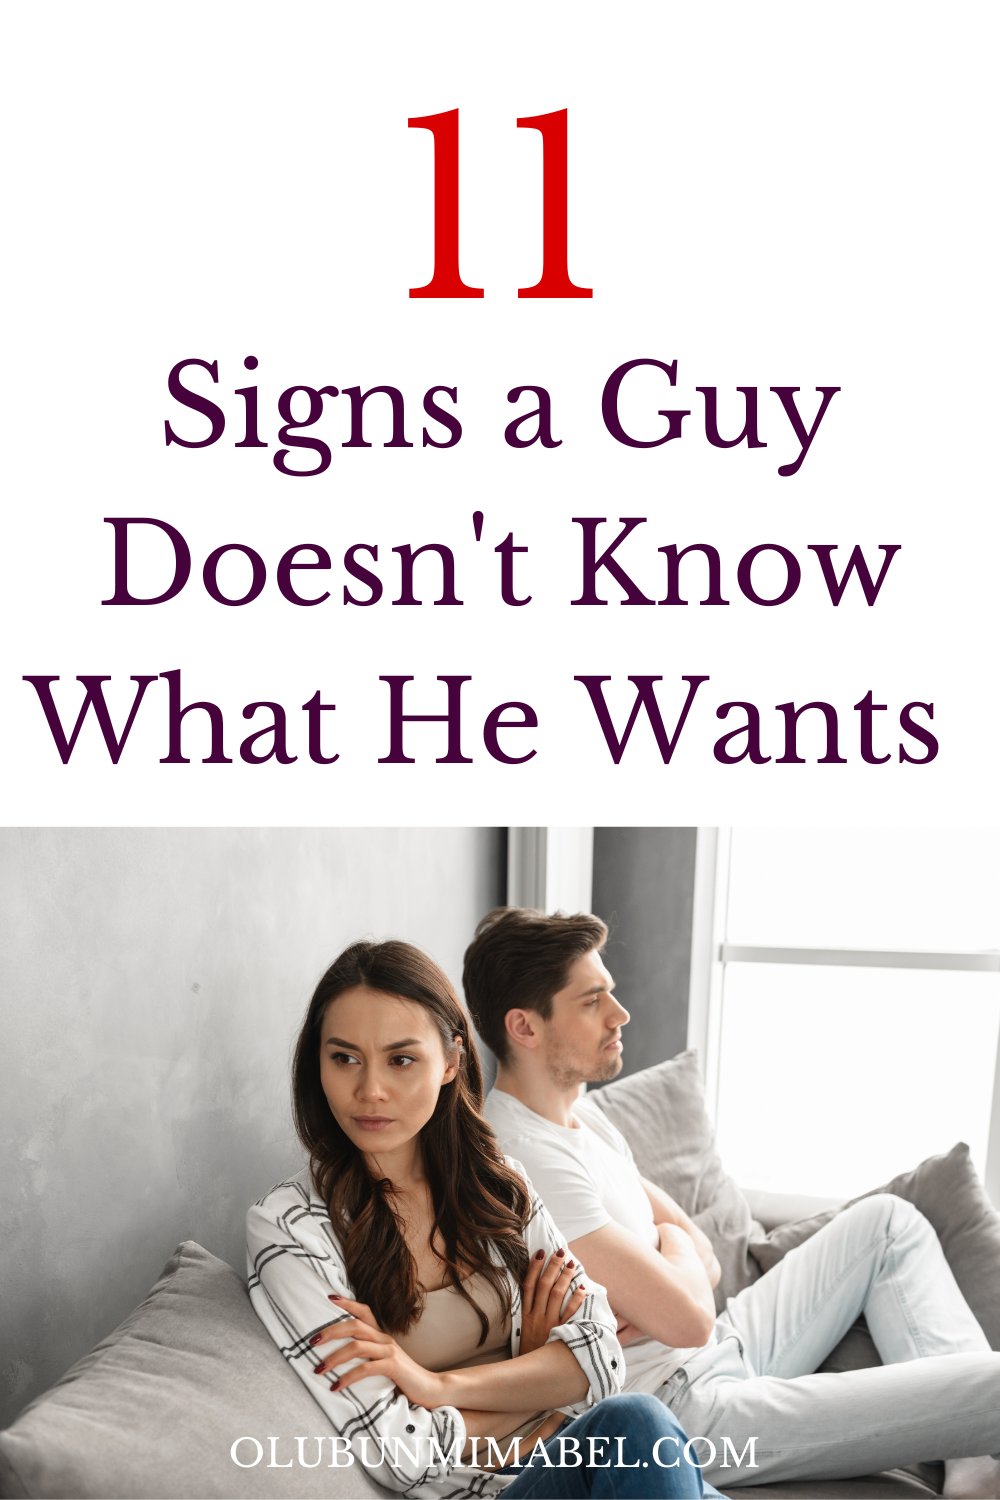 Signs A Guy Doesn't Know What He Wants